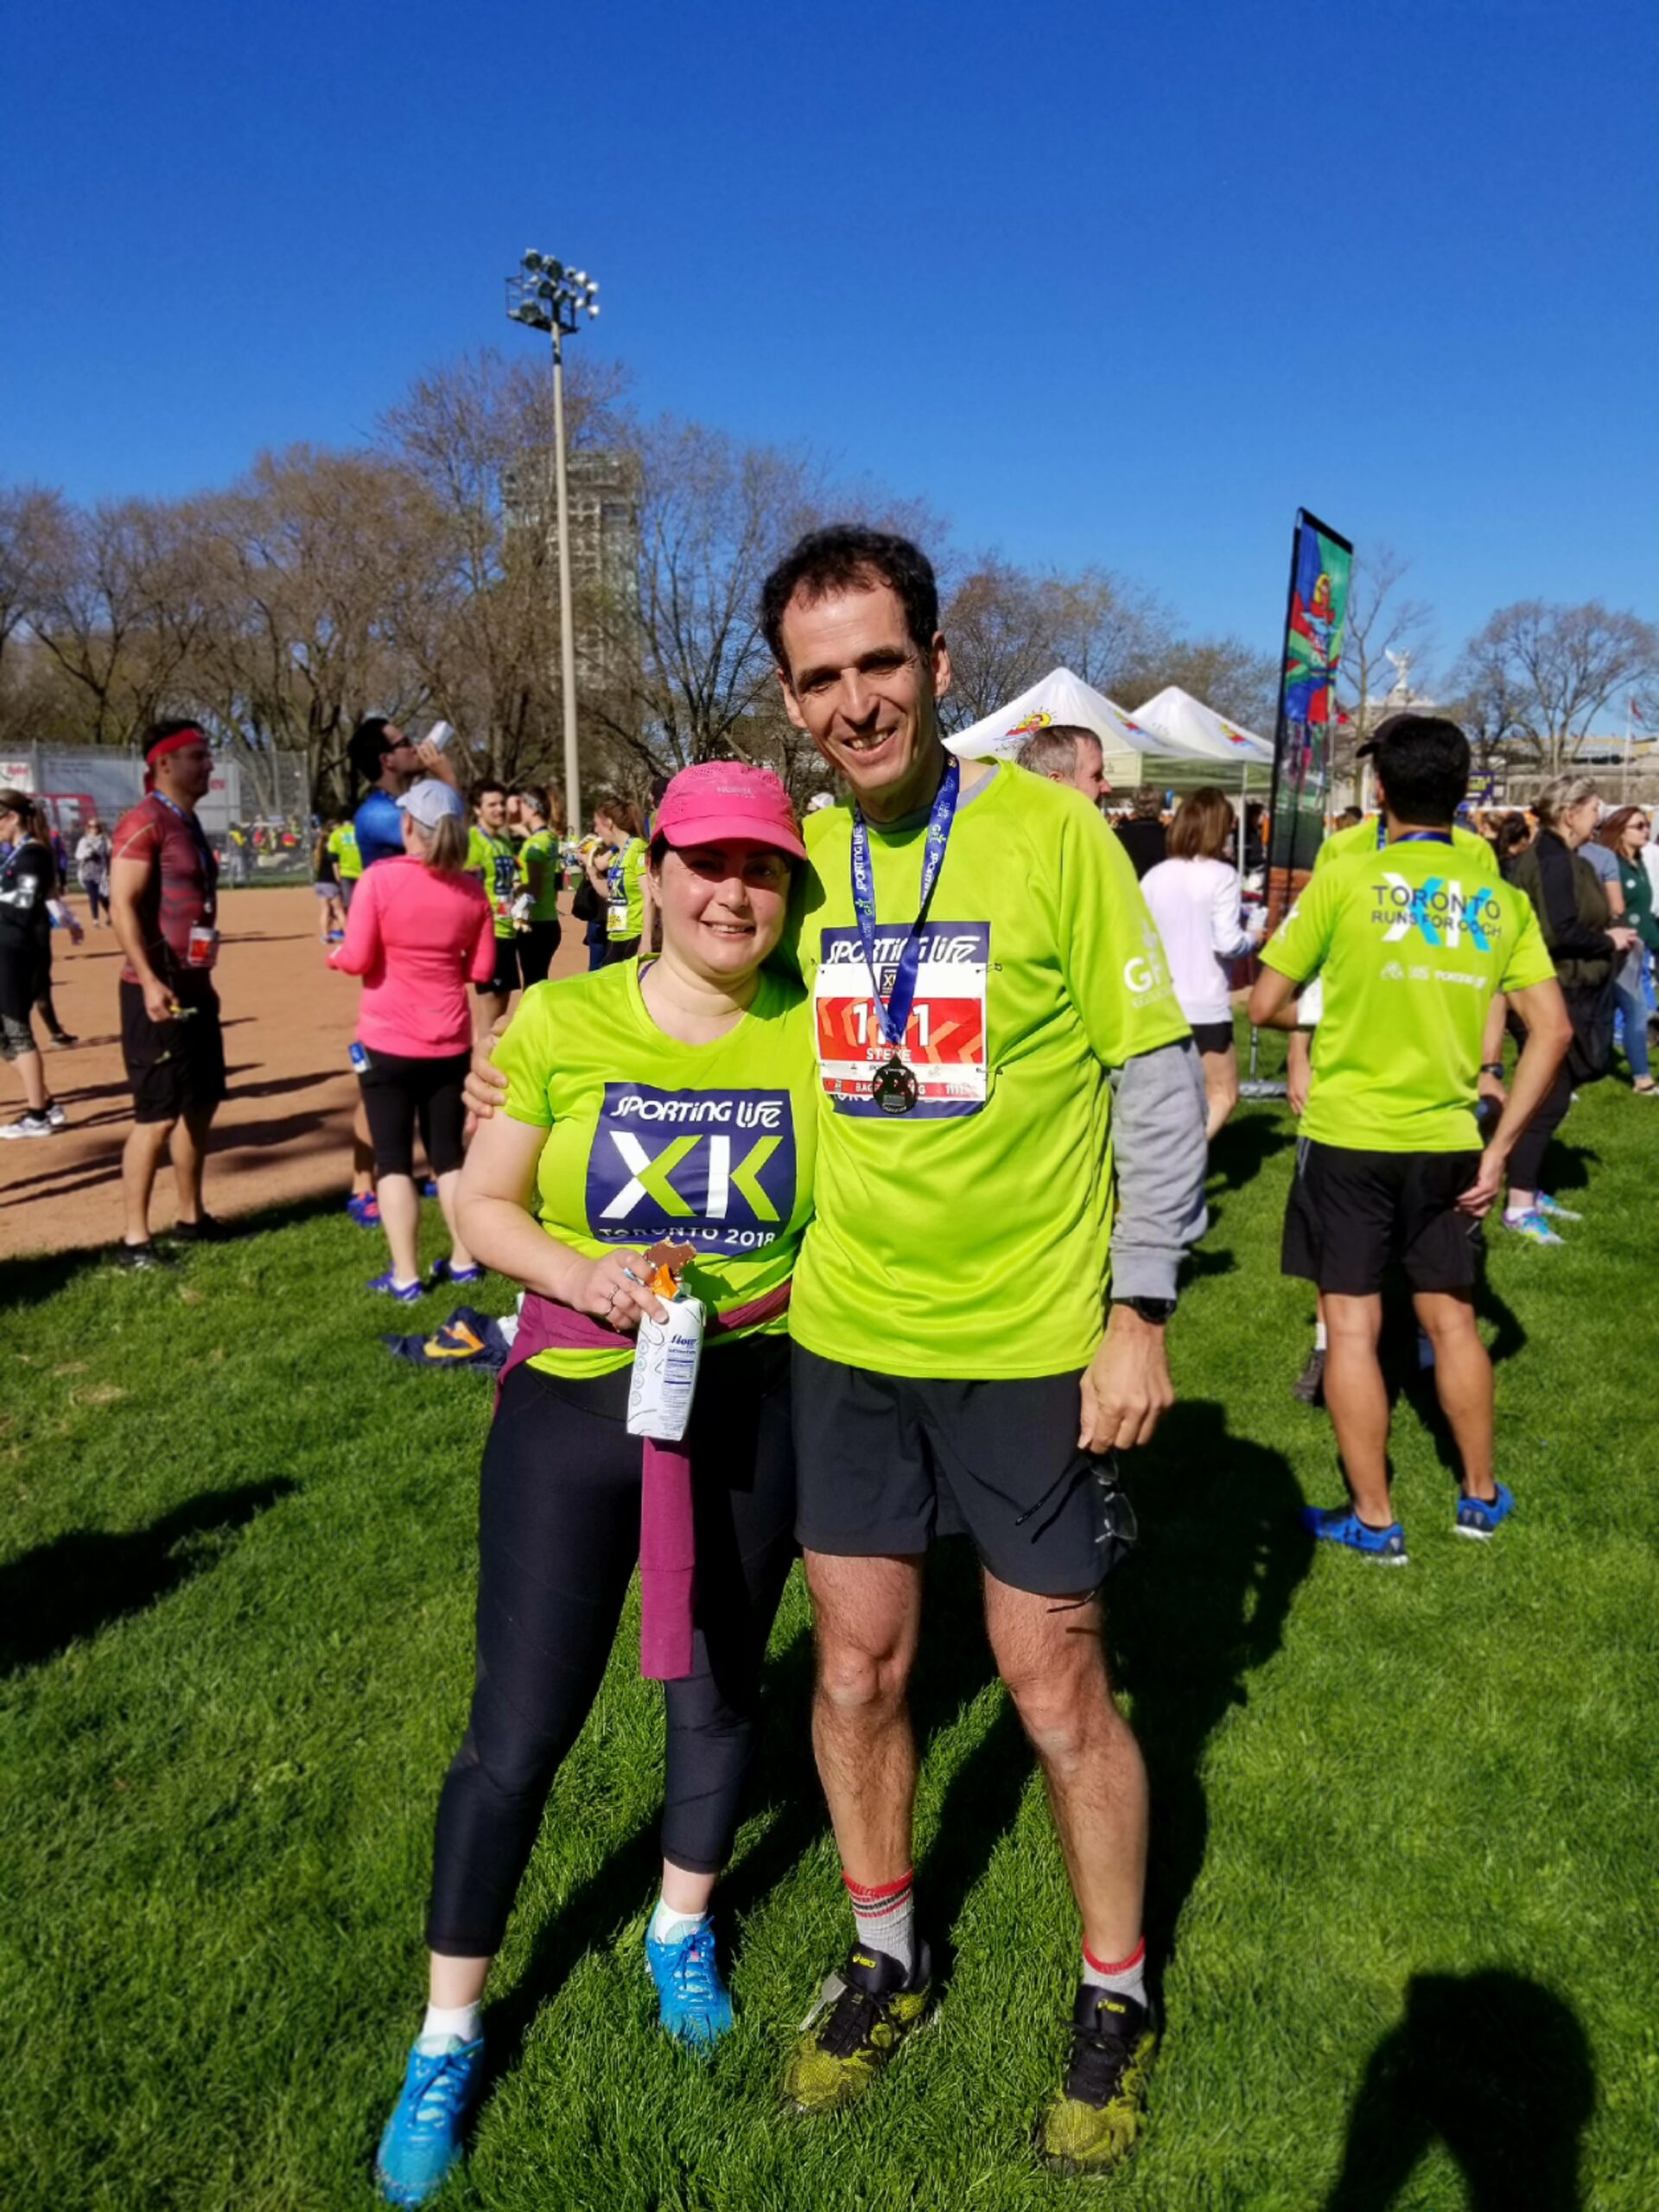 steve standing with another runner at sl10k